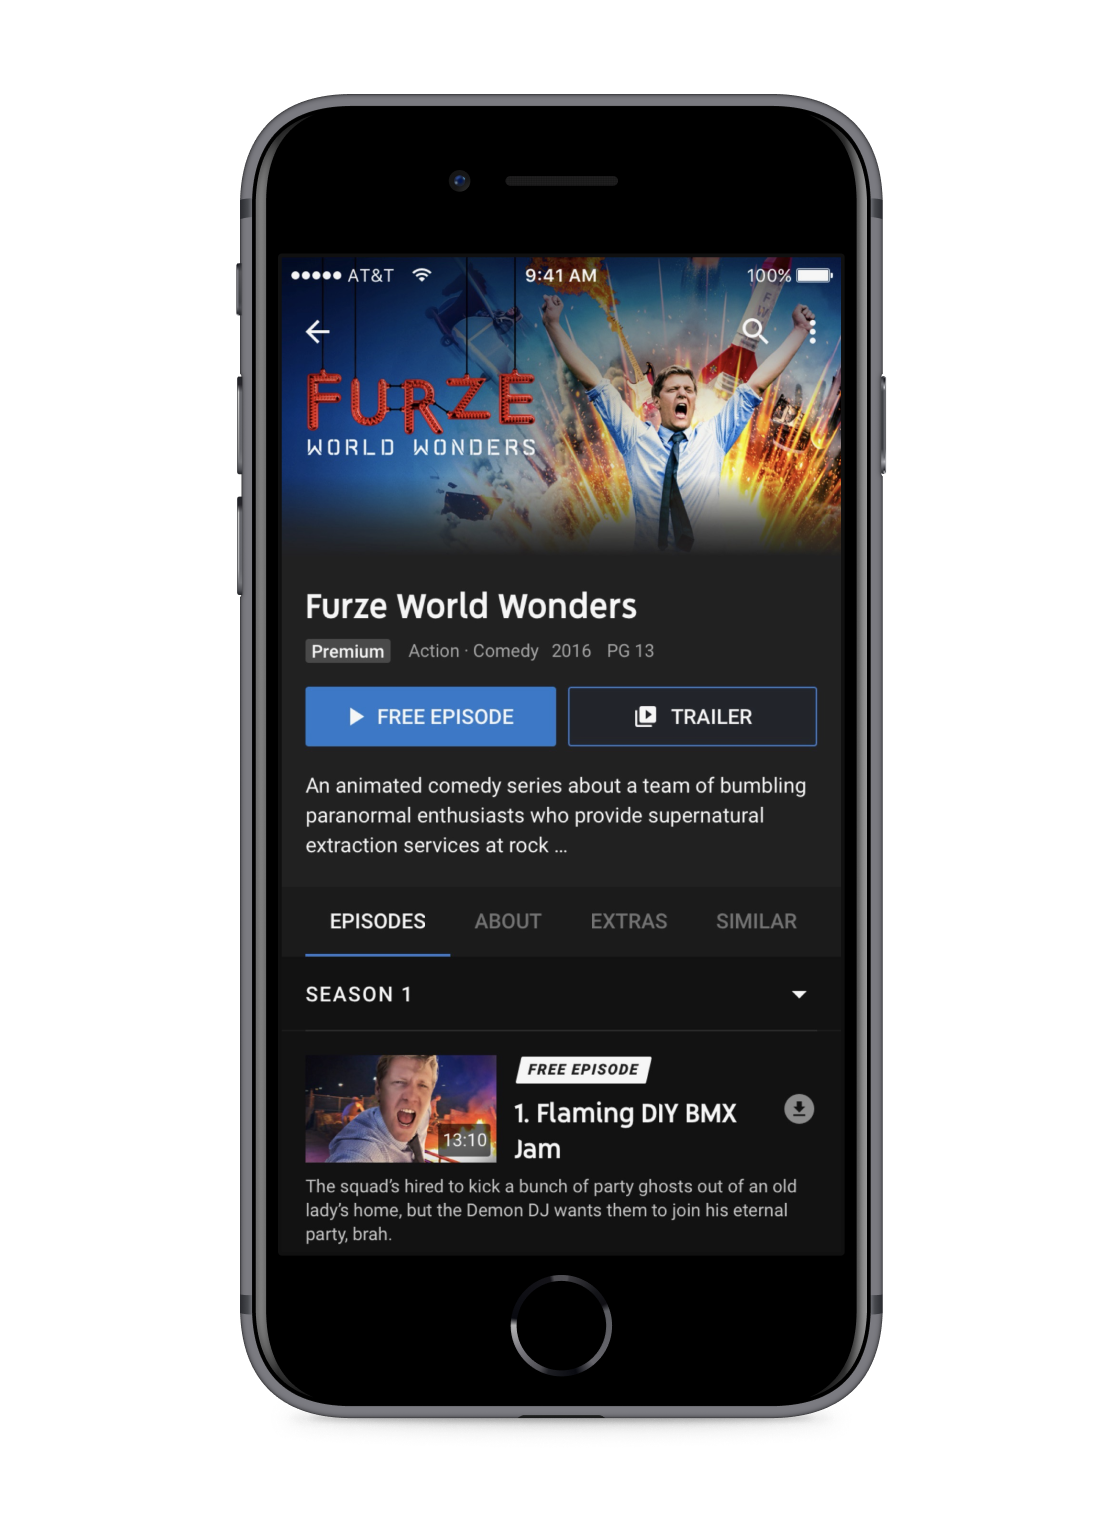 A detail page inside the YouTube app for the show 'Furze World Wonders'